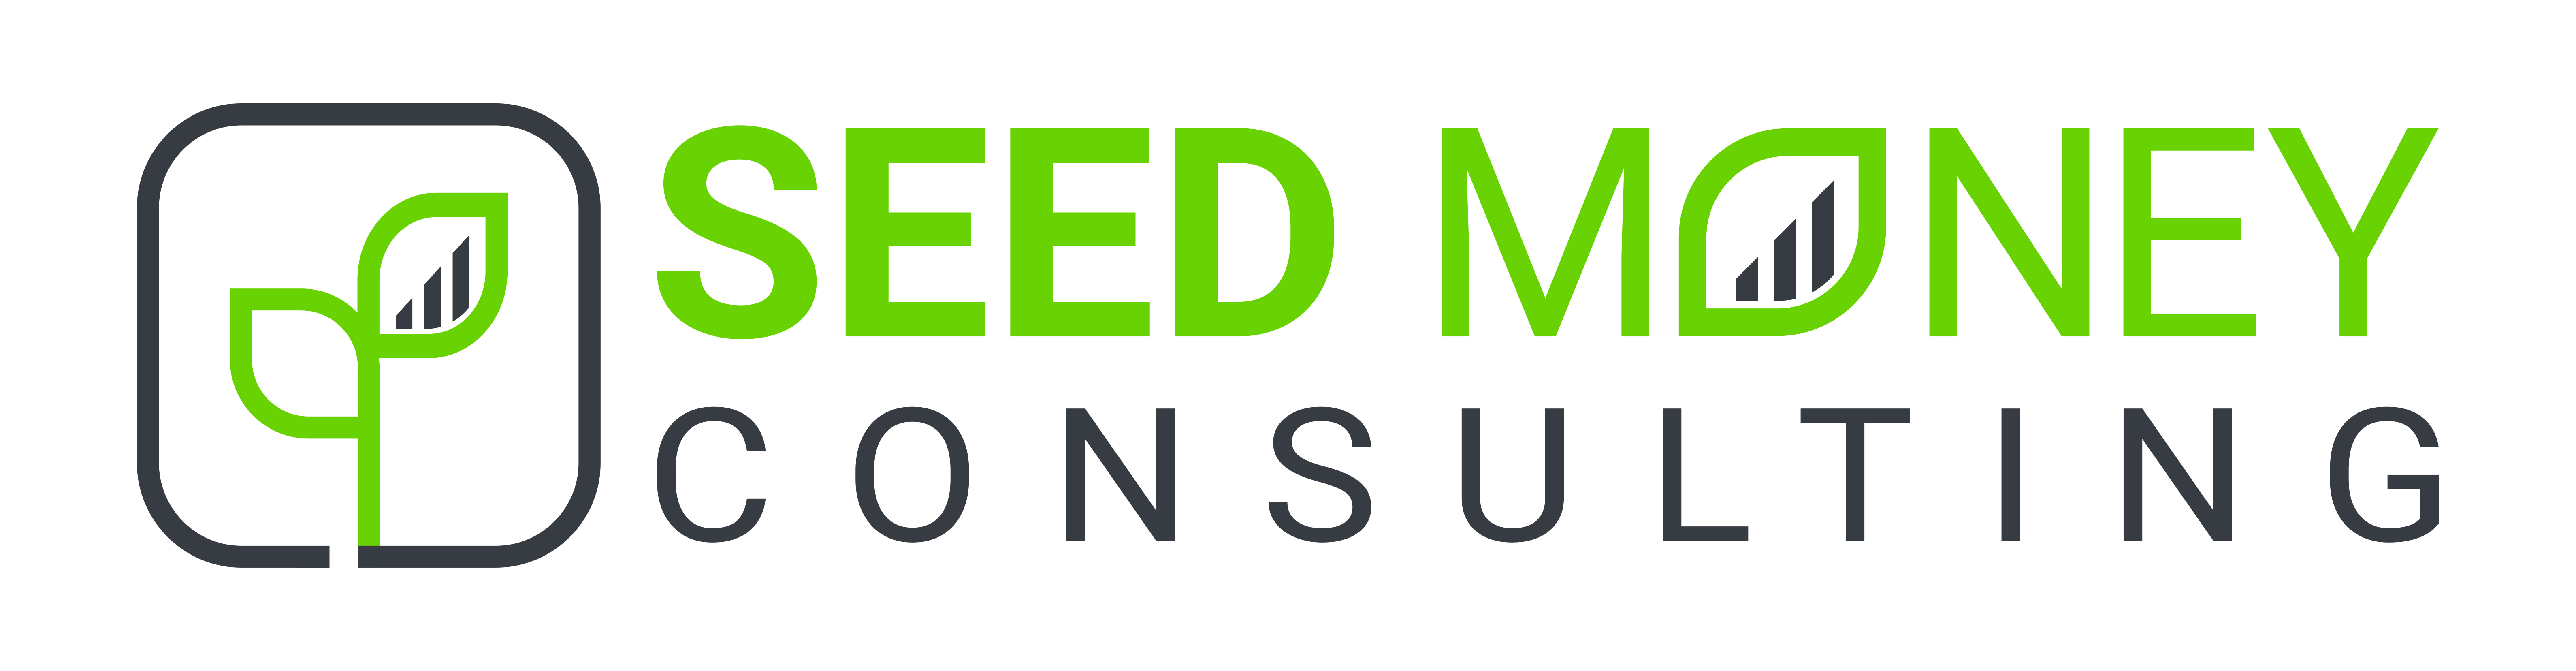 seed-money-consulting